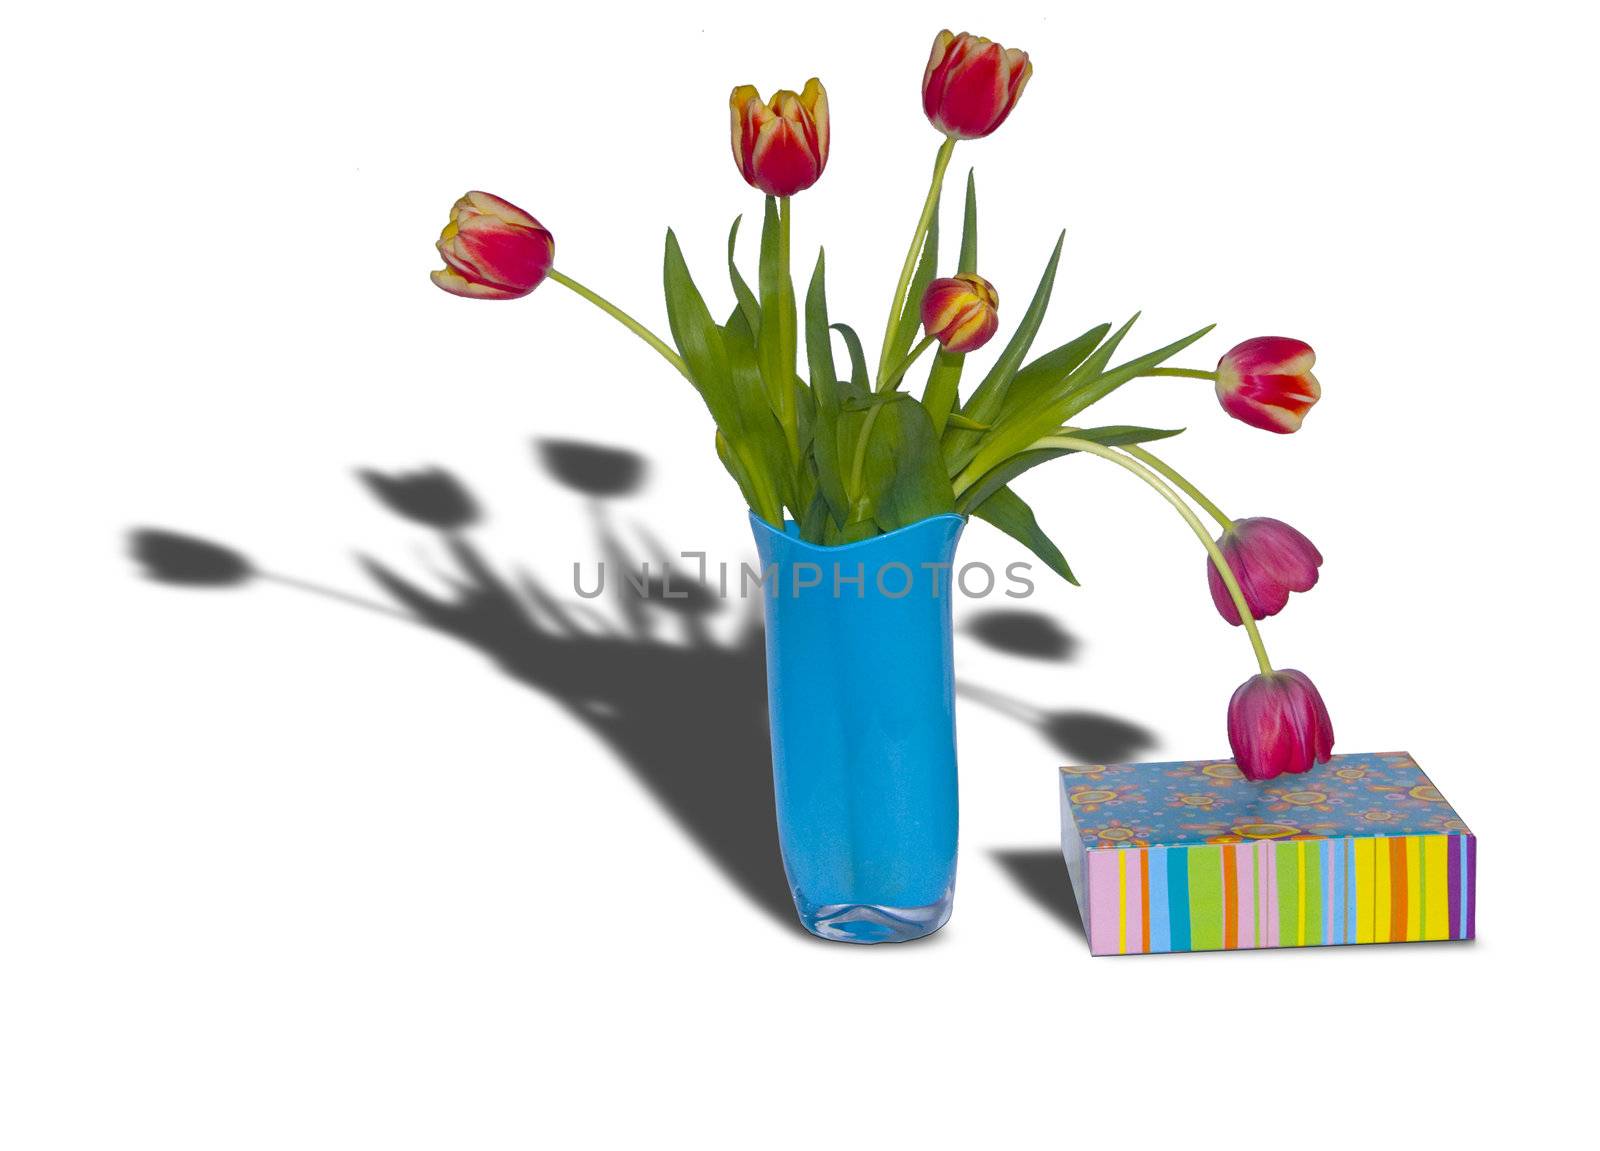 The image of a bouquet of tulips and a gift box